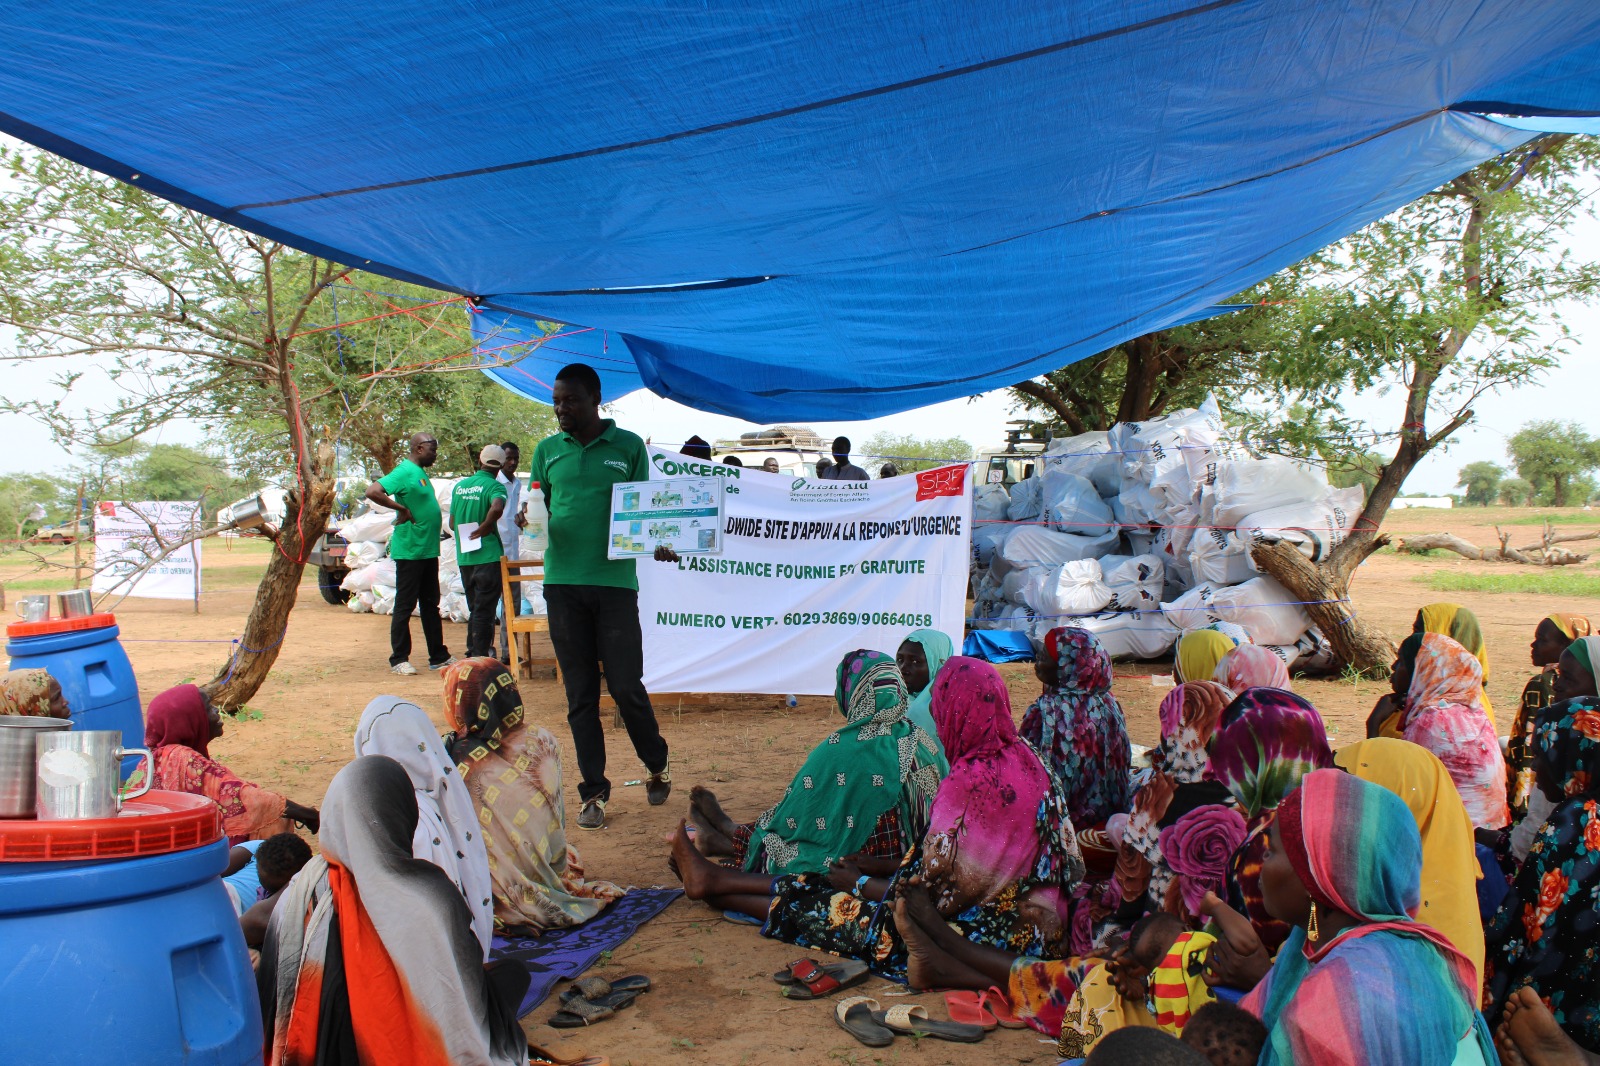 Concern programs at refugee camp in Chad